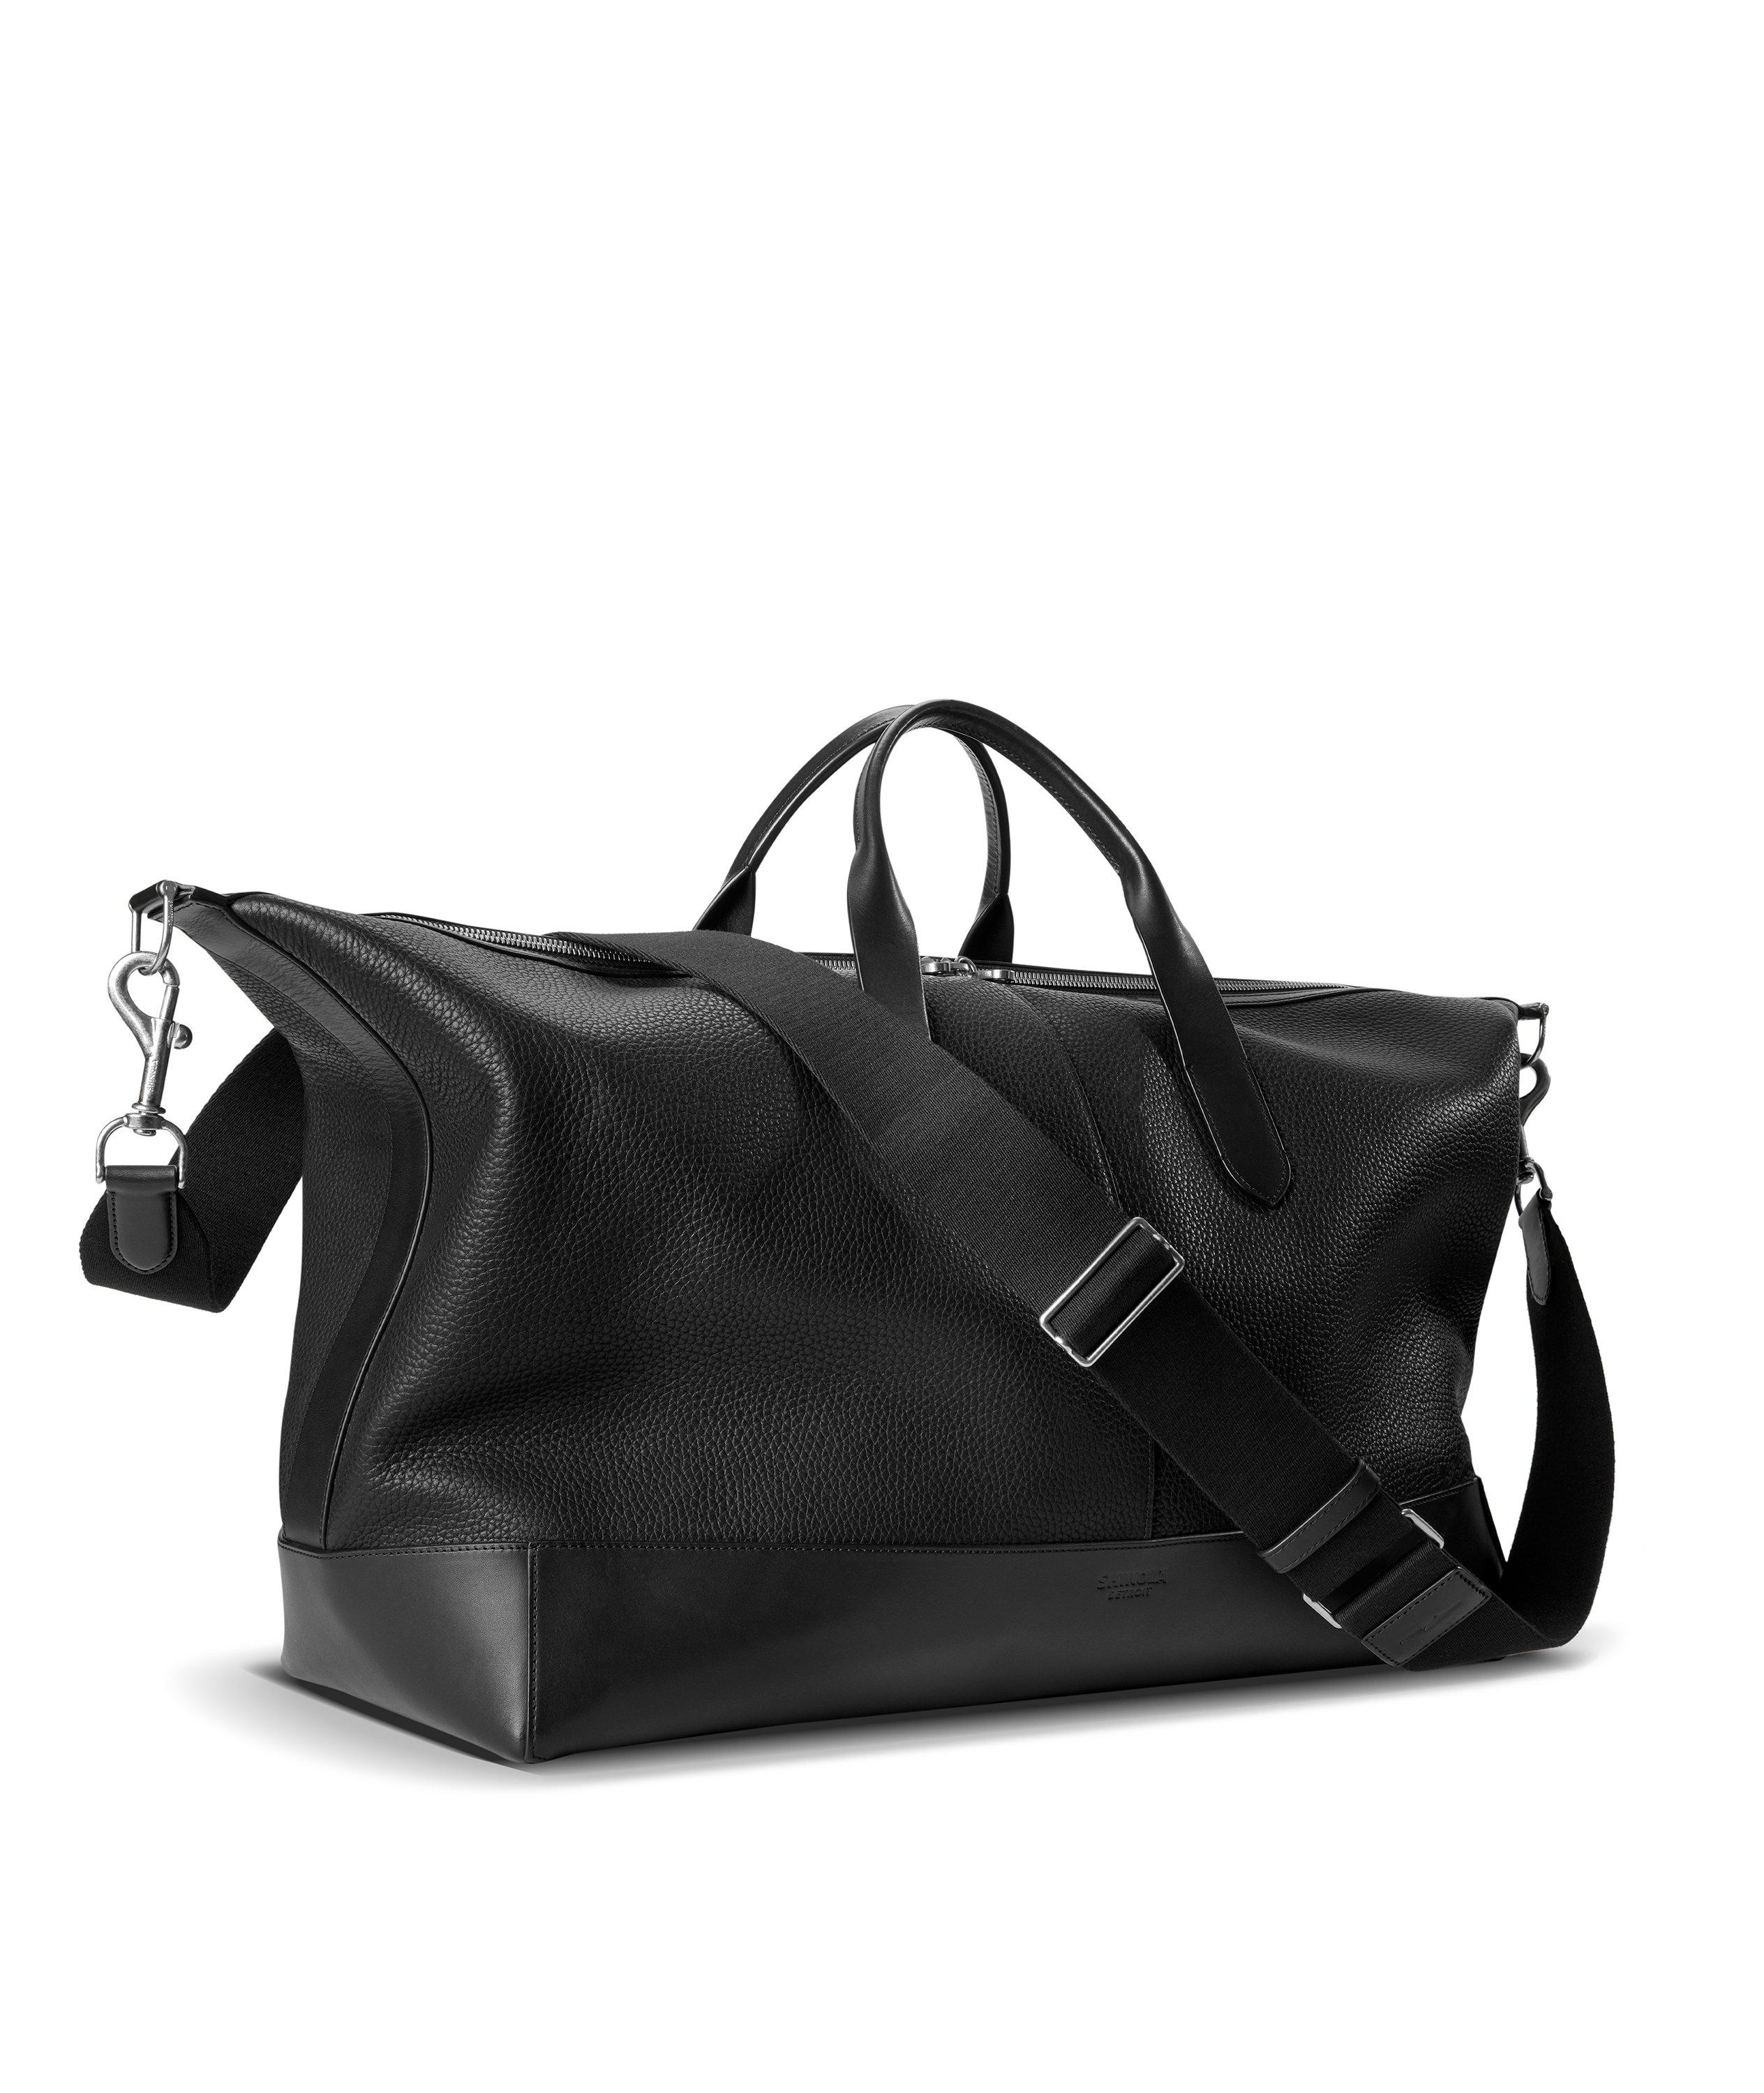 Canfield Classic Holdall Duffle Bag